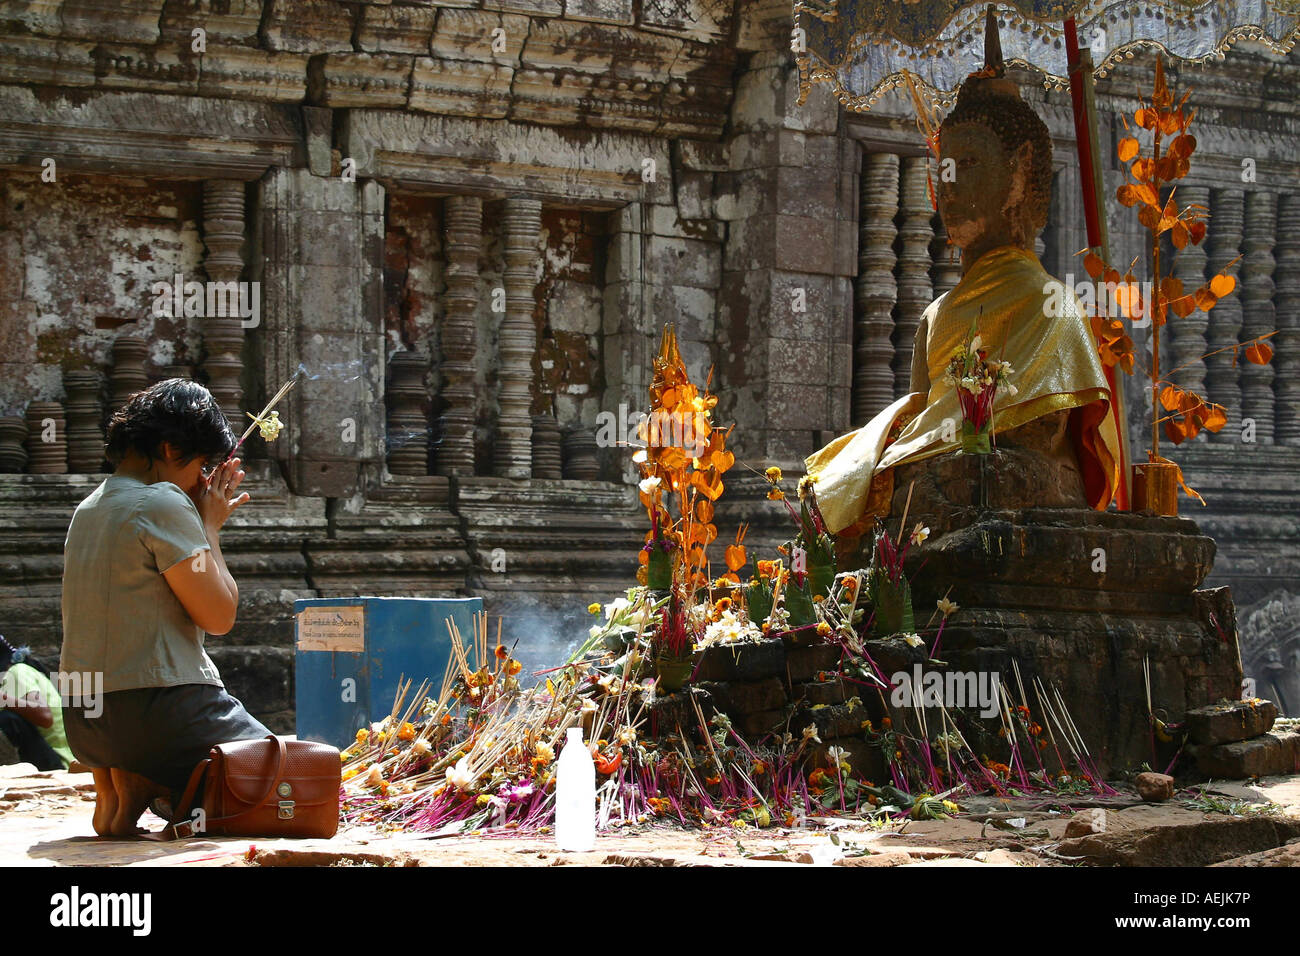 Young buddhist woman praying in front of a buddha statue at the temple Wat Phou, Wat Phou, Laos Stock Photo